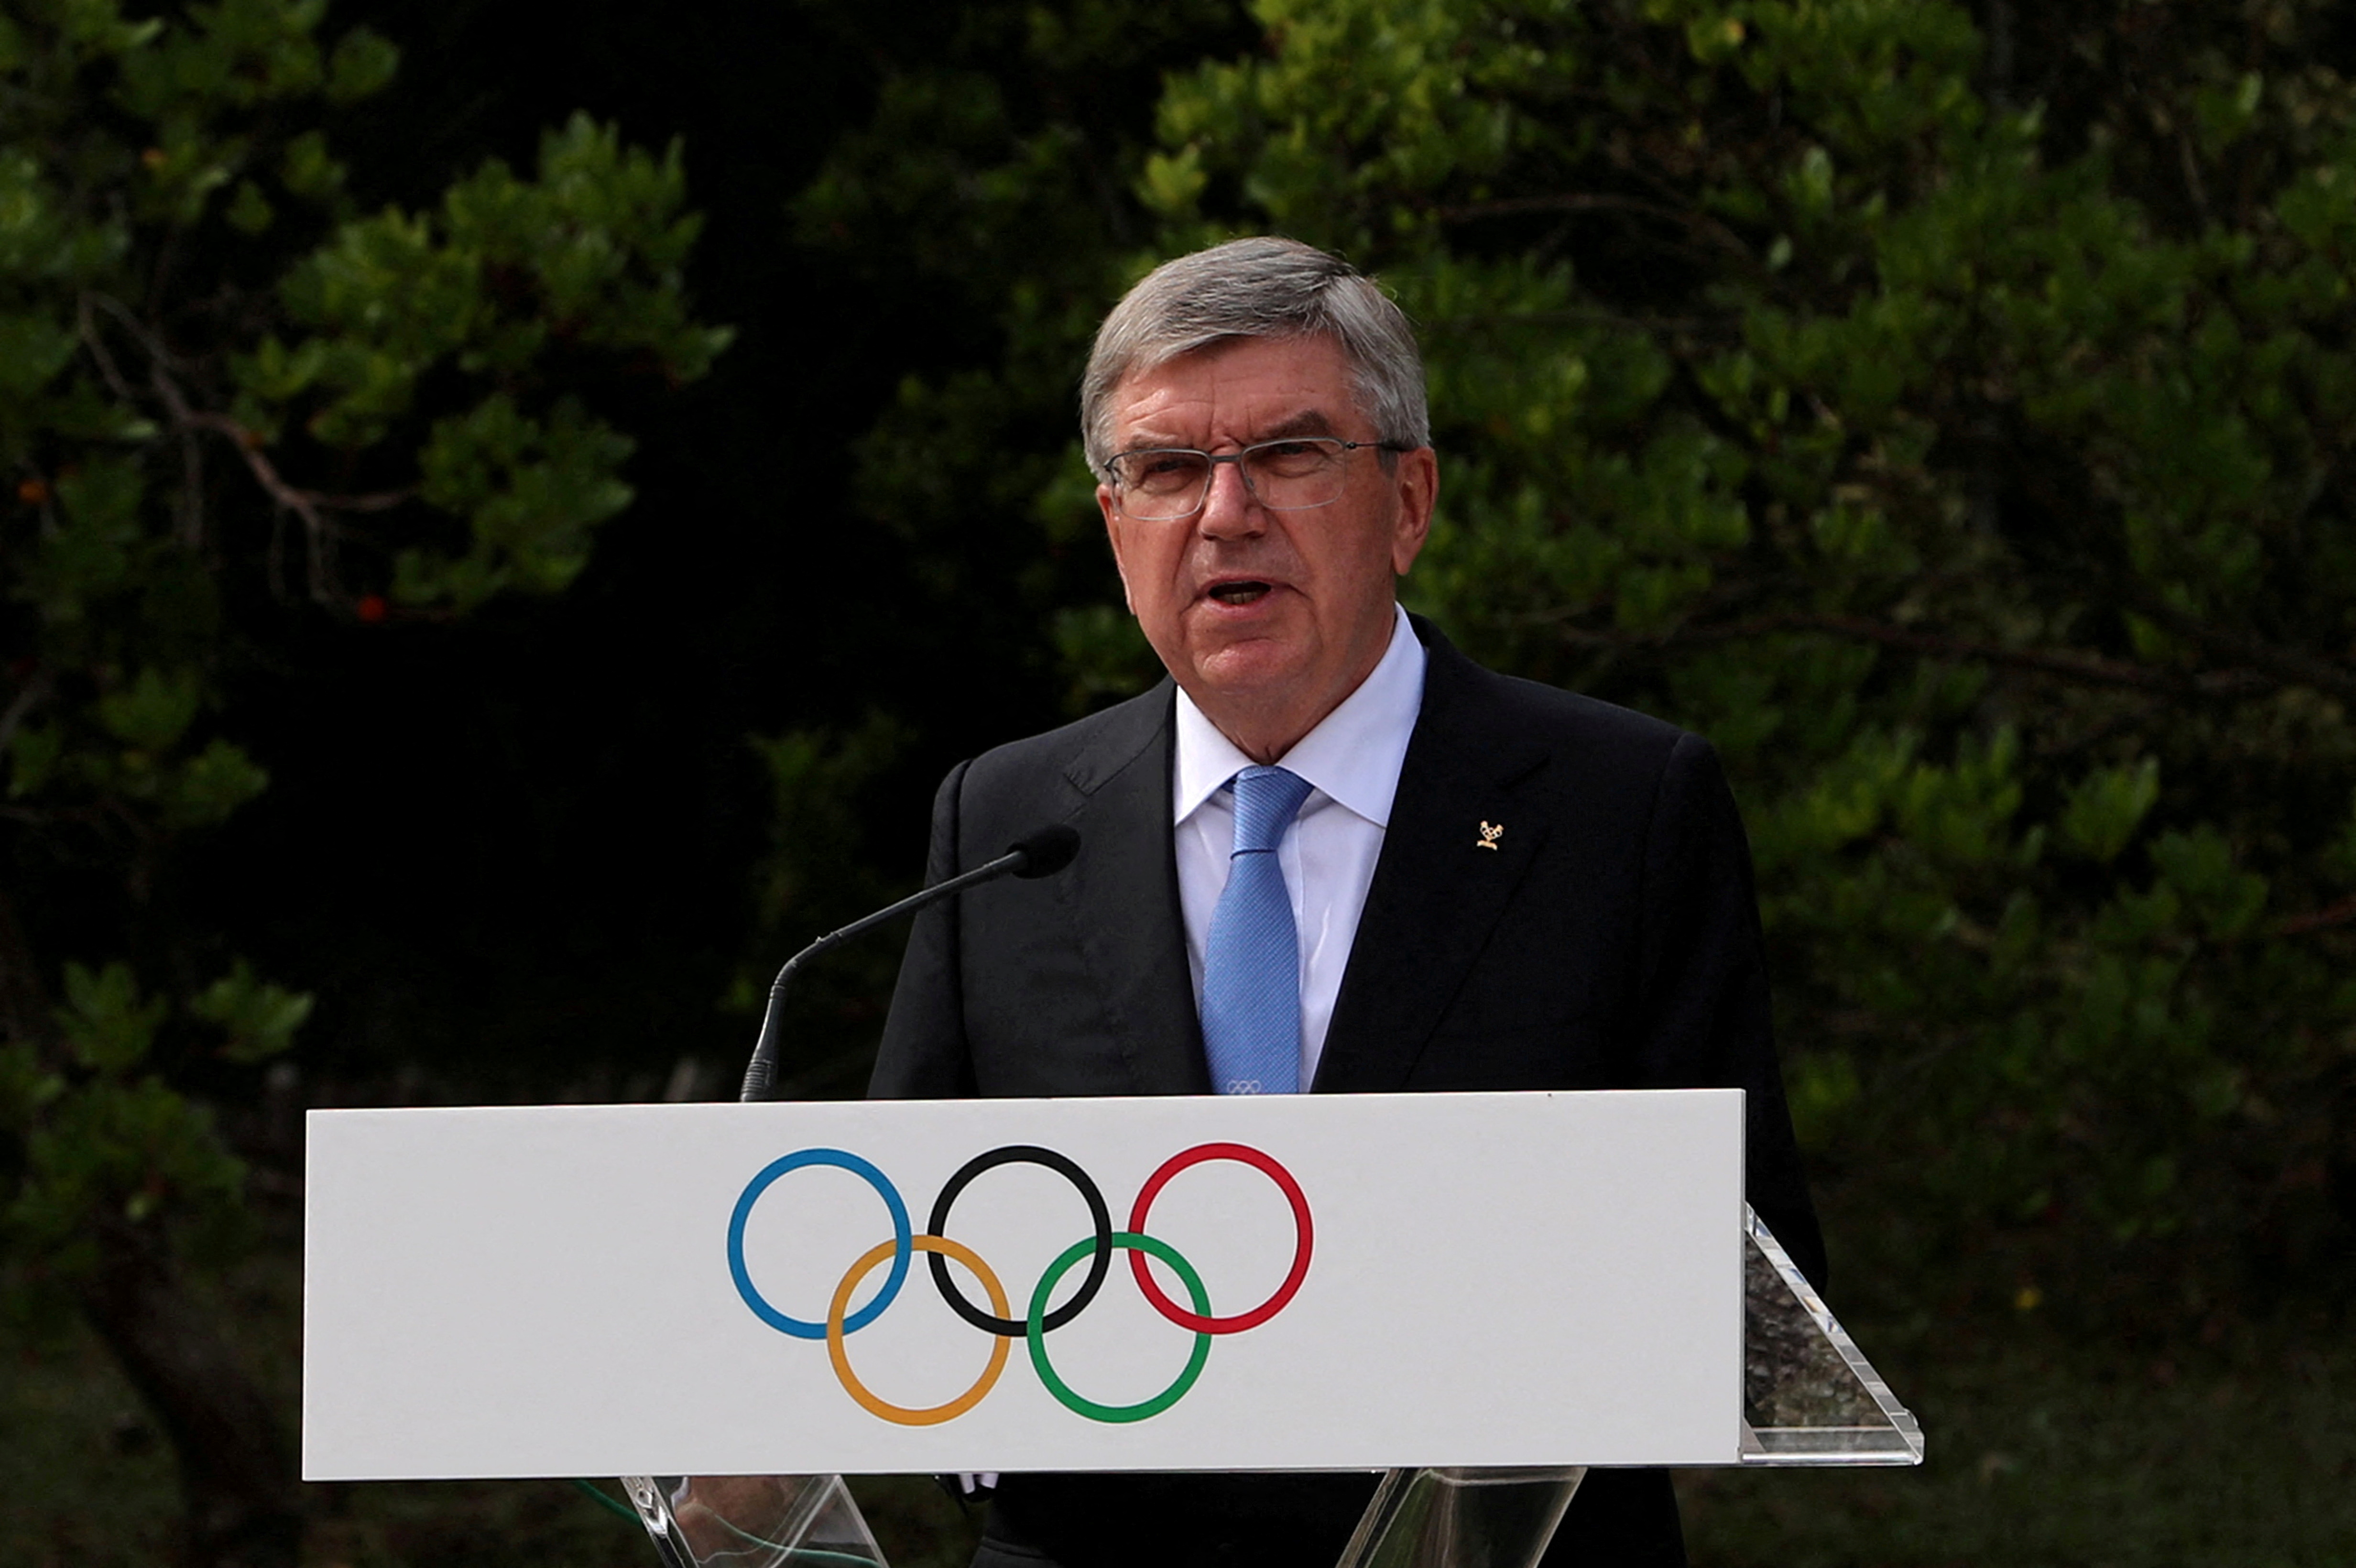 President of the International Olympic Committee (IOC) Thomas Bach delivers a speech at the Pierre de Coubertin monument, where the founder of the IOC's heart is buried, during a ceremony for the 100-year anniversary of the creation of the IOC